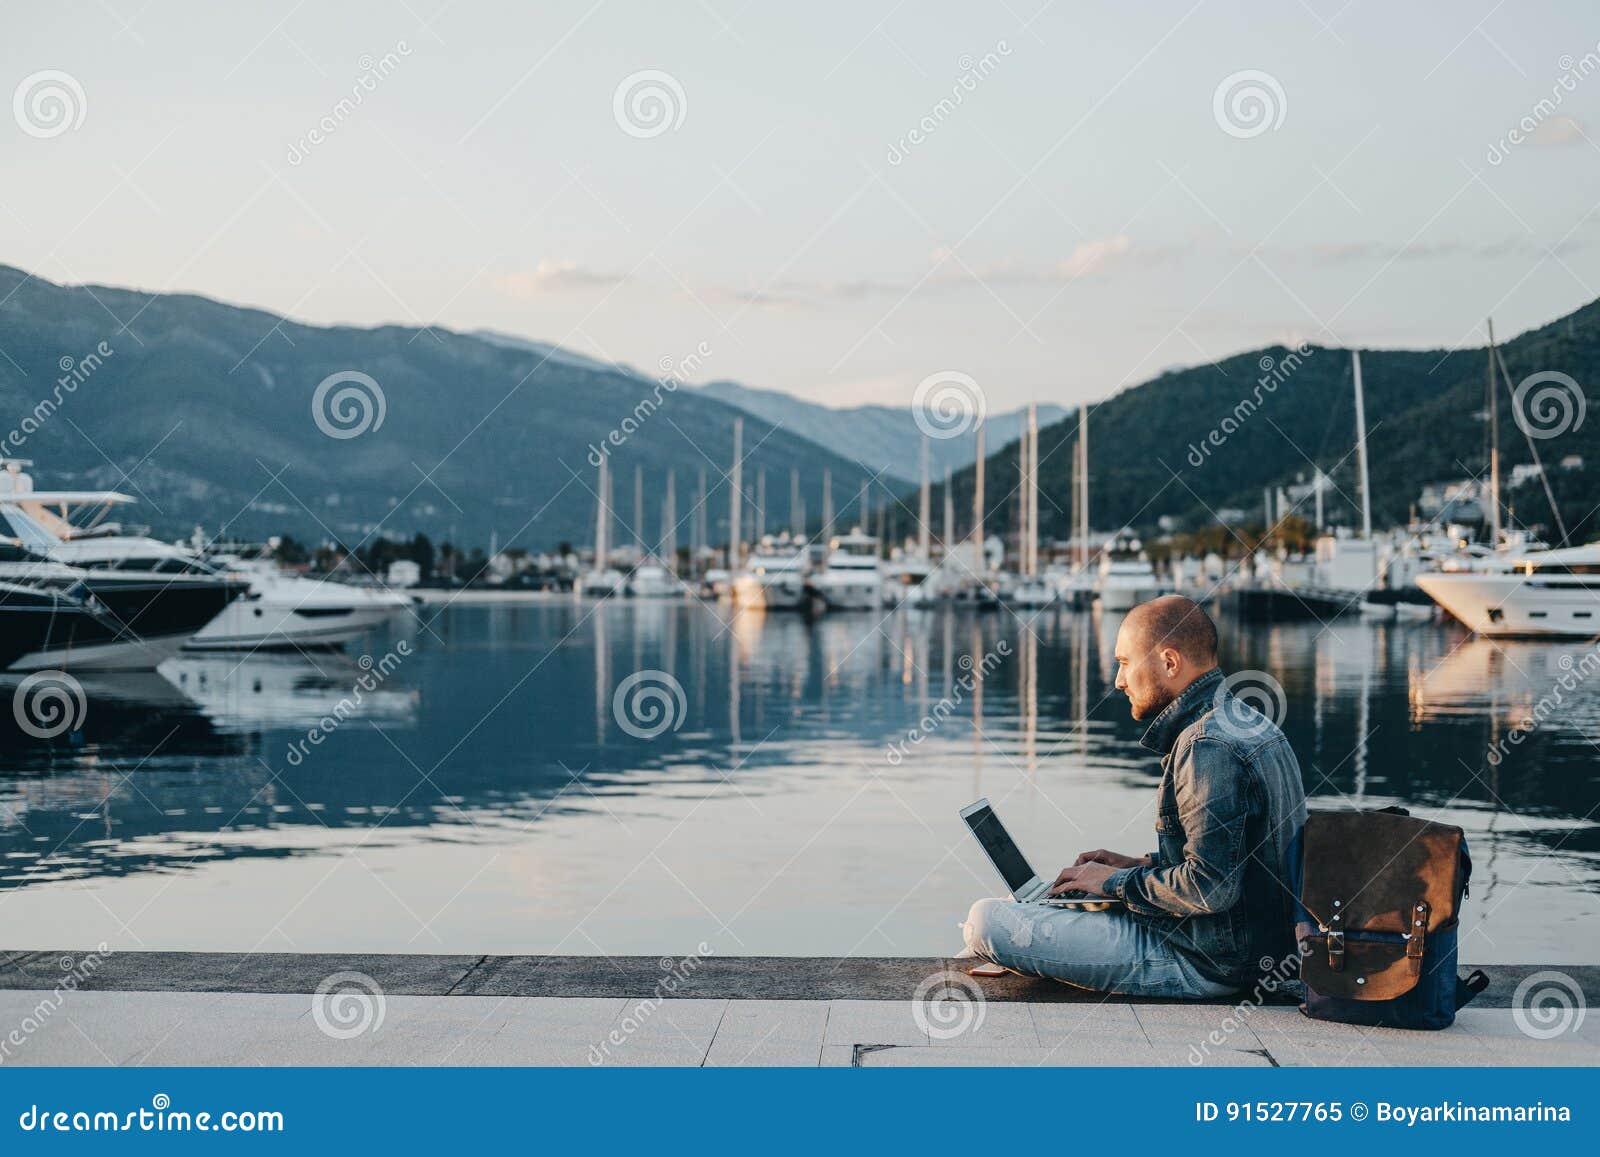 freelancer working on laptop on the shore near the yacht boat at